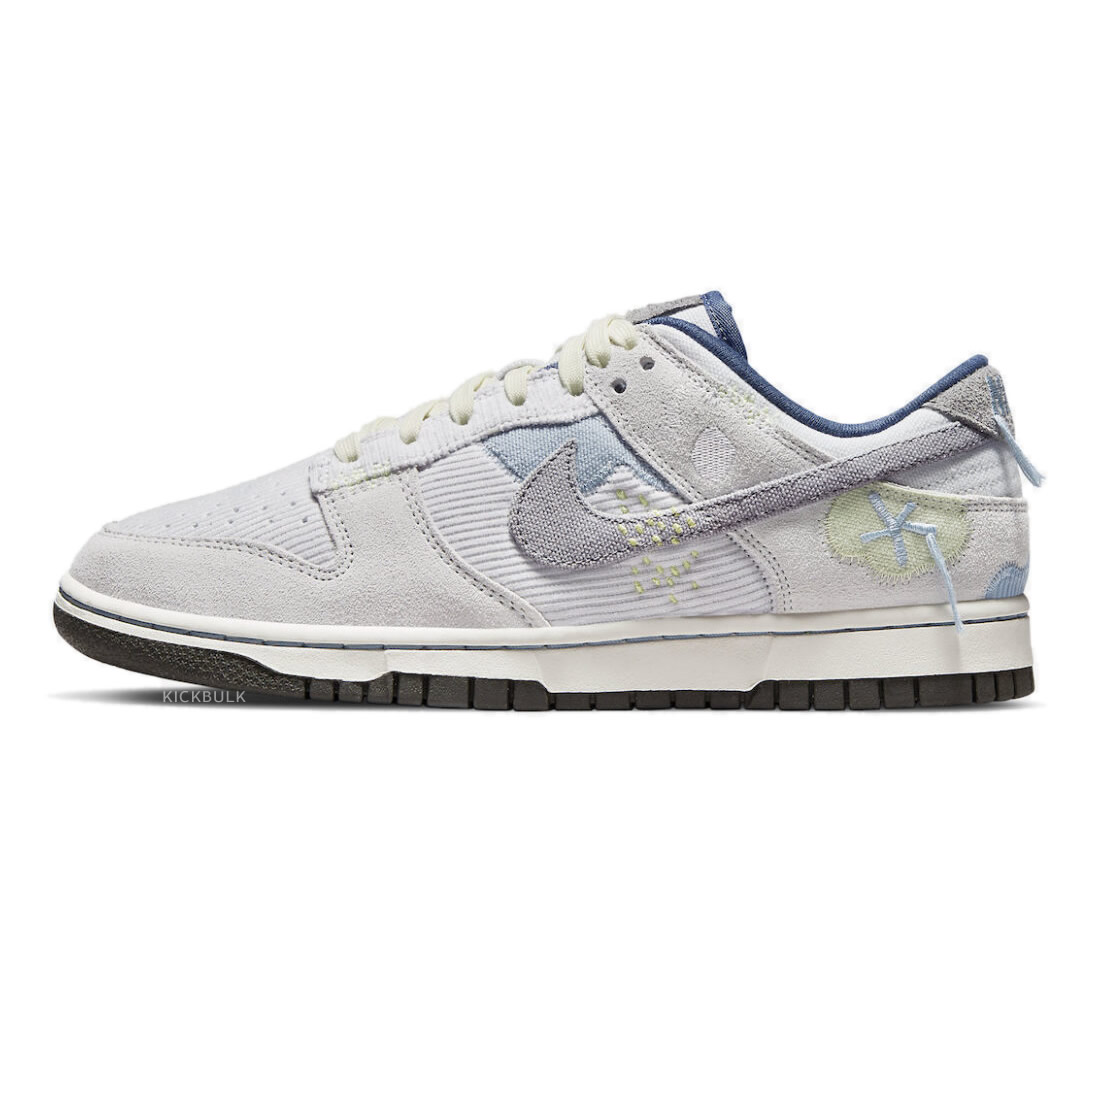 Nike Dunk Low On The Bright Side Photon Dust Wmns Dq5076 001 1 - www.kickbulk.org